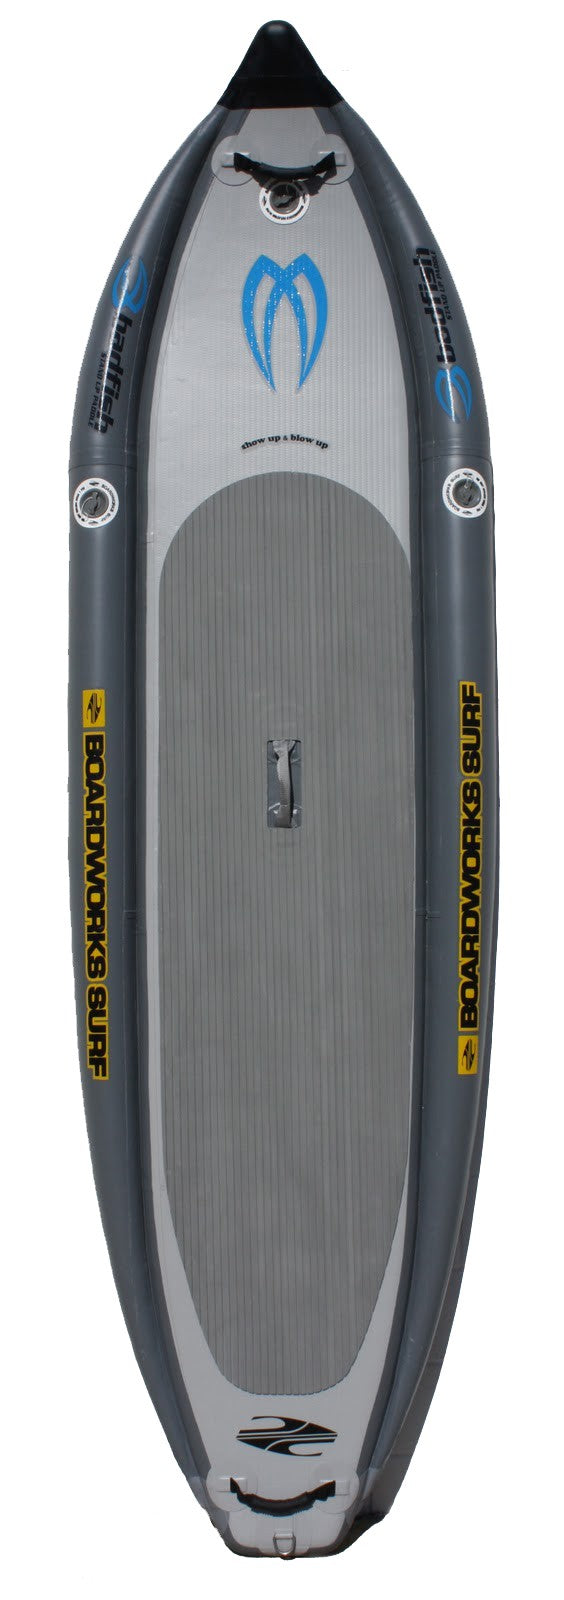 BOARDWORKS - Stand Up Paddle gonflable - Badfish MCIT 9' - Gris